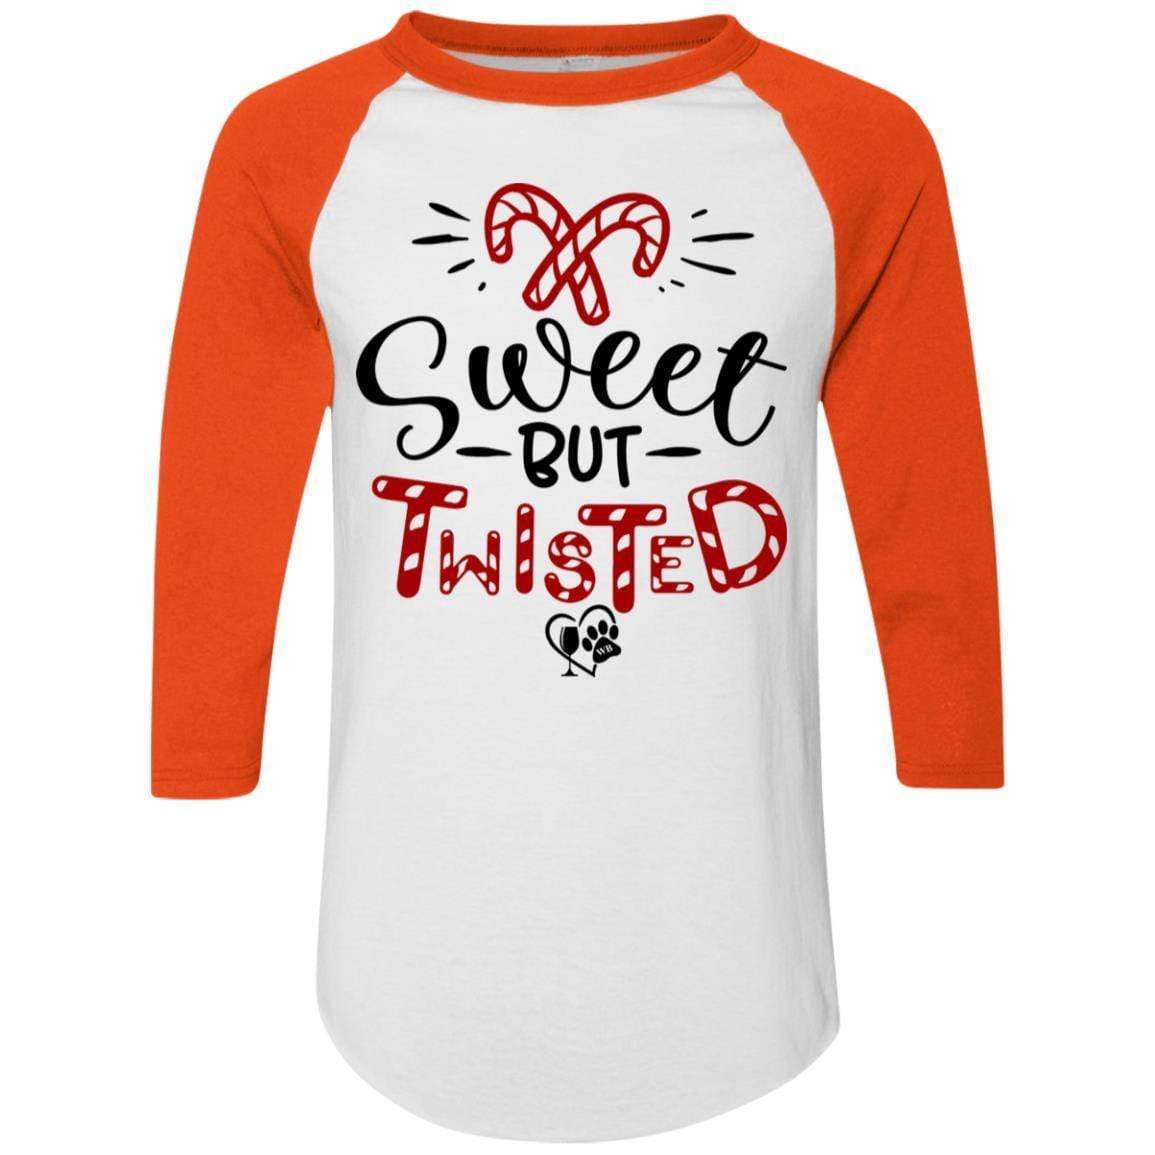 T-Shirts White/Orange / S WineyBitches.Co "Sweet But Twisted" Holiday Colorblock Raglan Jersey WineyBitchesCo